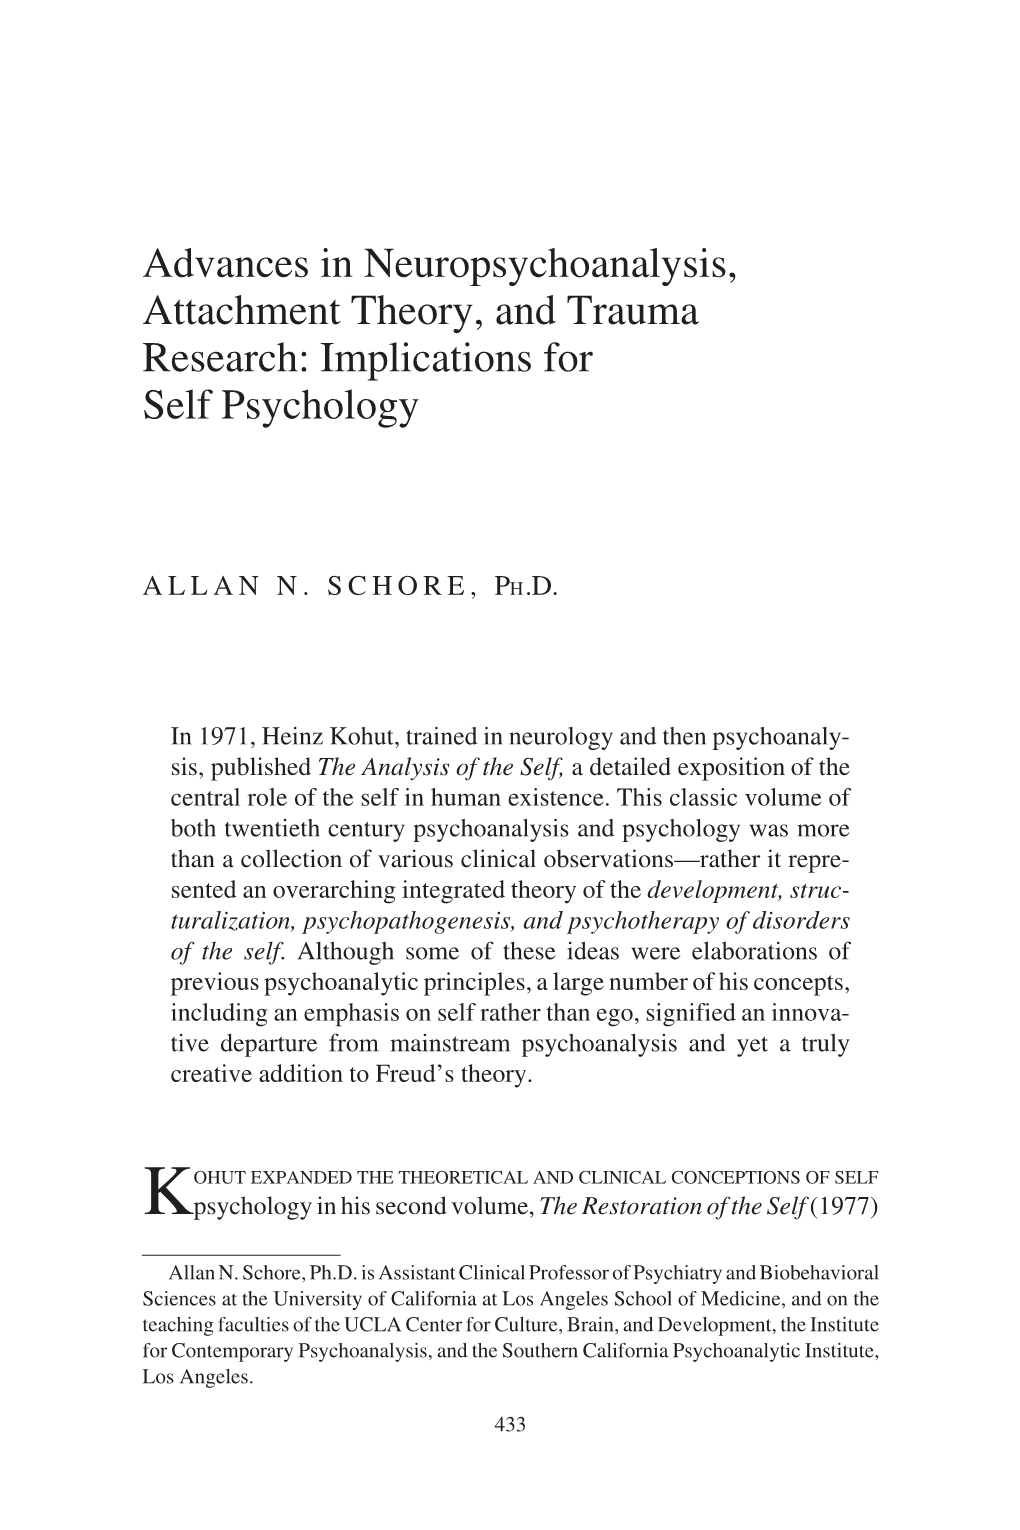 Advances in Neuropsychoanalysis, Attachment Theory, and Trauma Research: Implications for Self Psychology